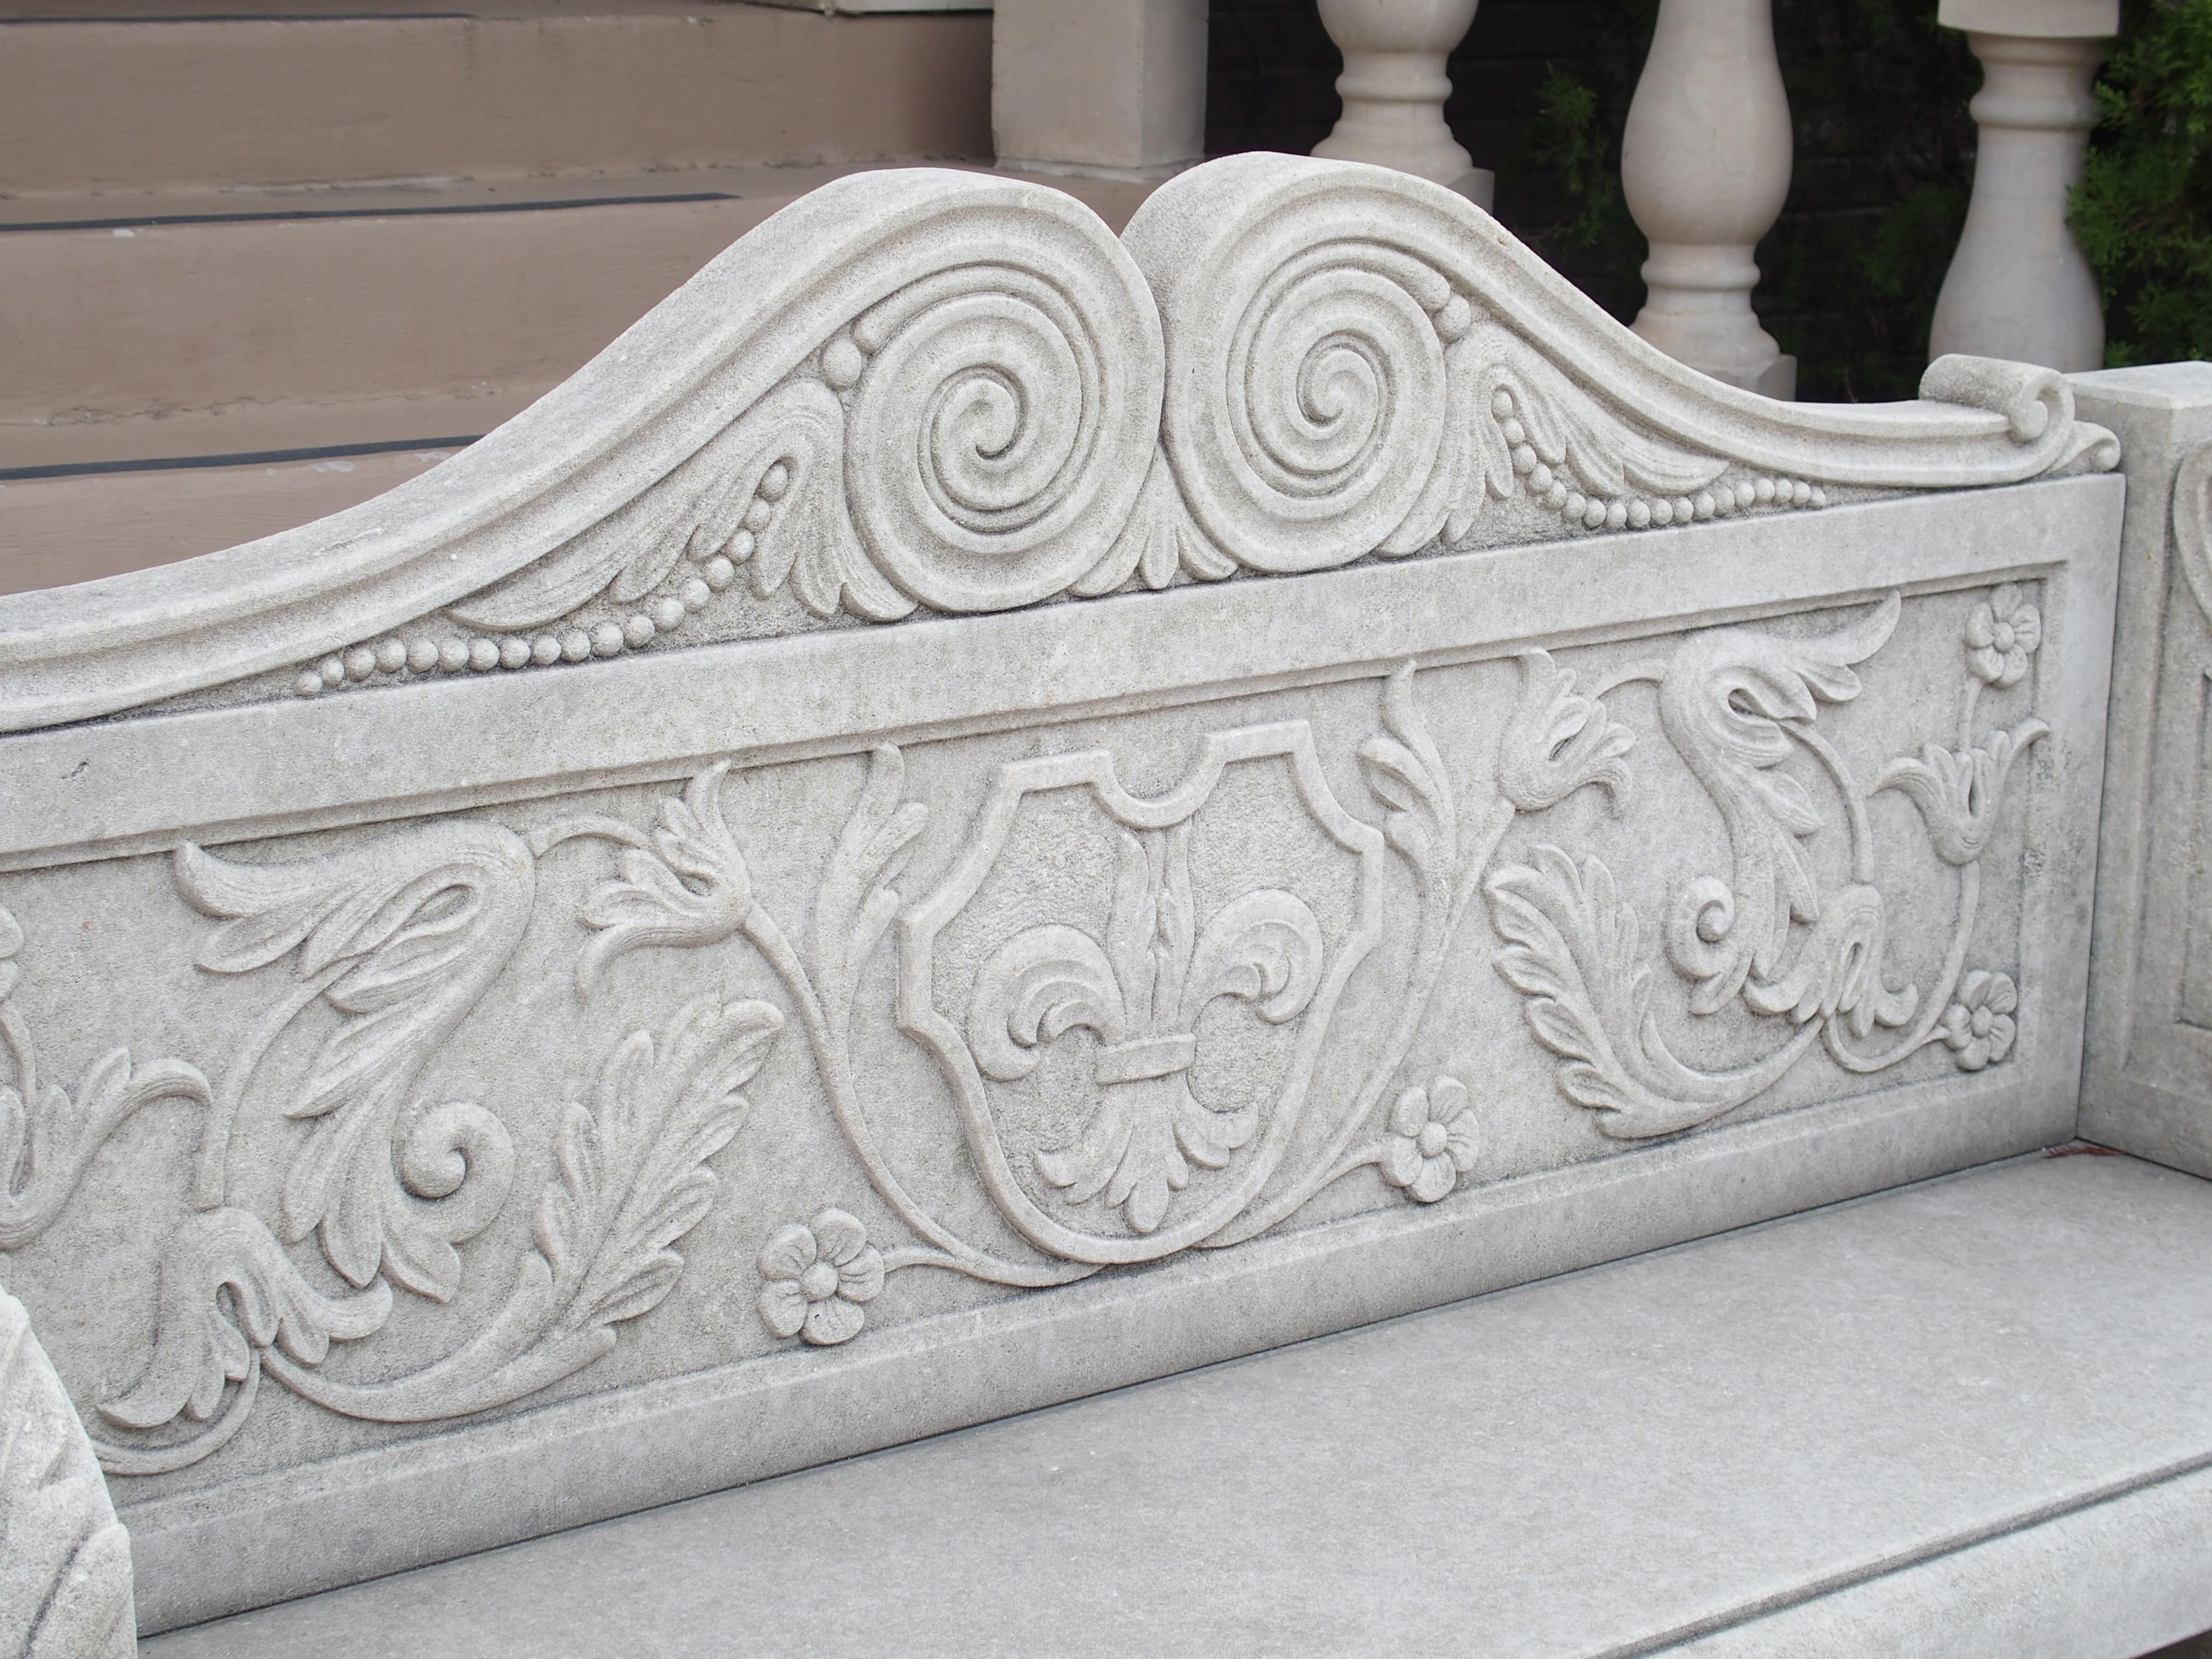 Hand-carved in Italy, this limestone garden bench features elaborate foliate motifs, including a fleur de lys and acanthus leaves. Consisting of six carved pieces of stone, the beautiful bench has developed a phenomenal dark gray patina over the